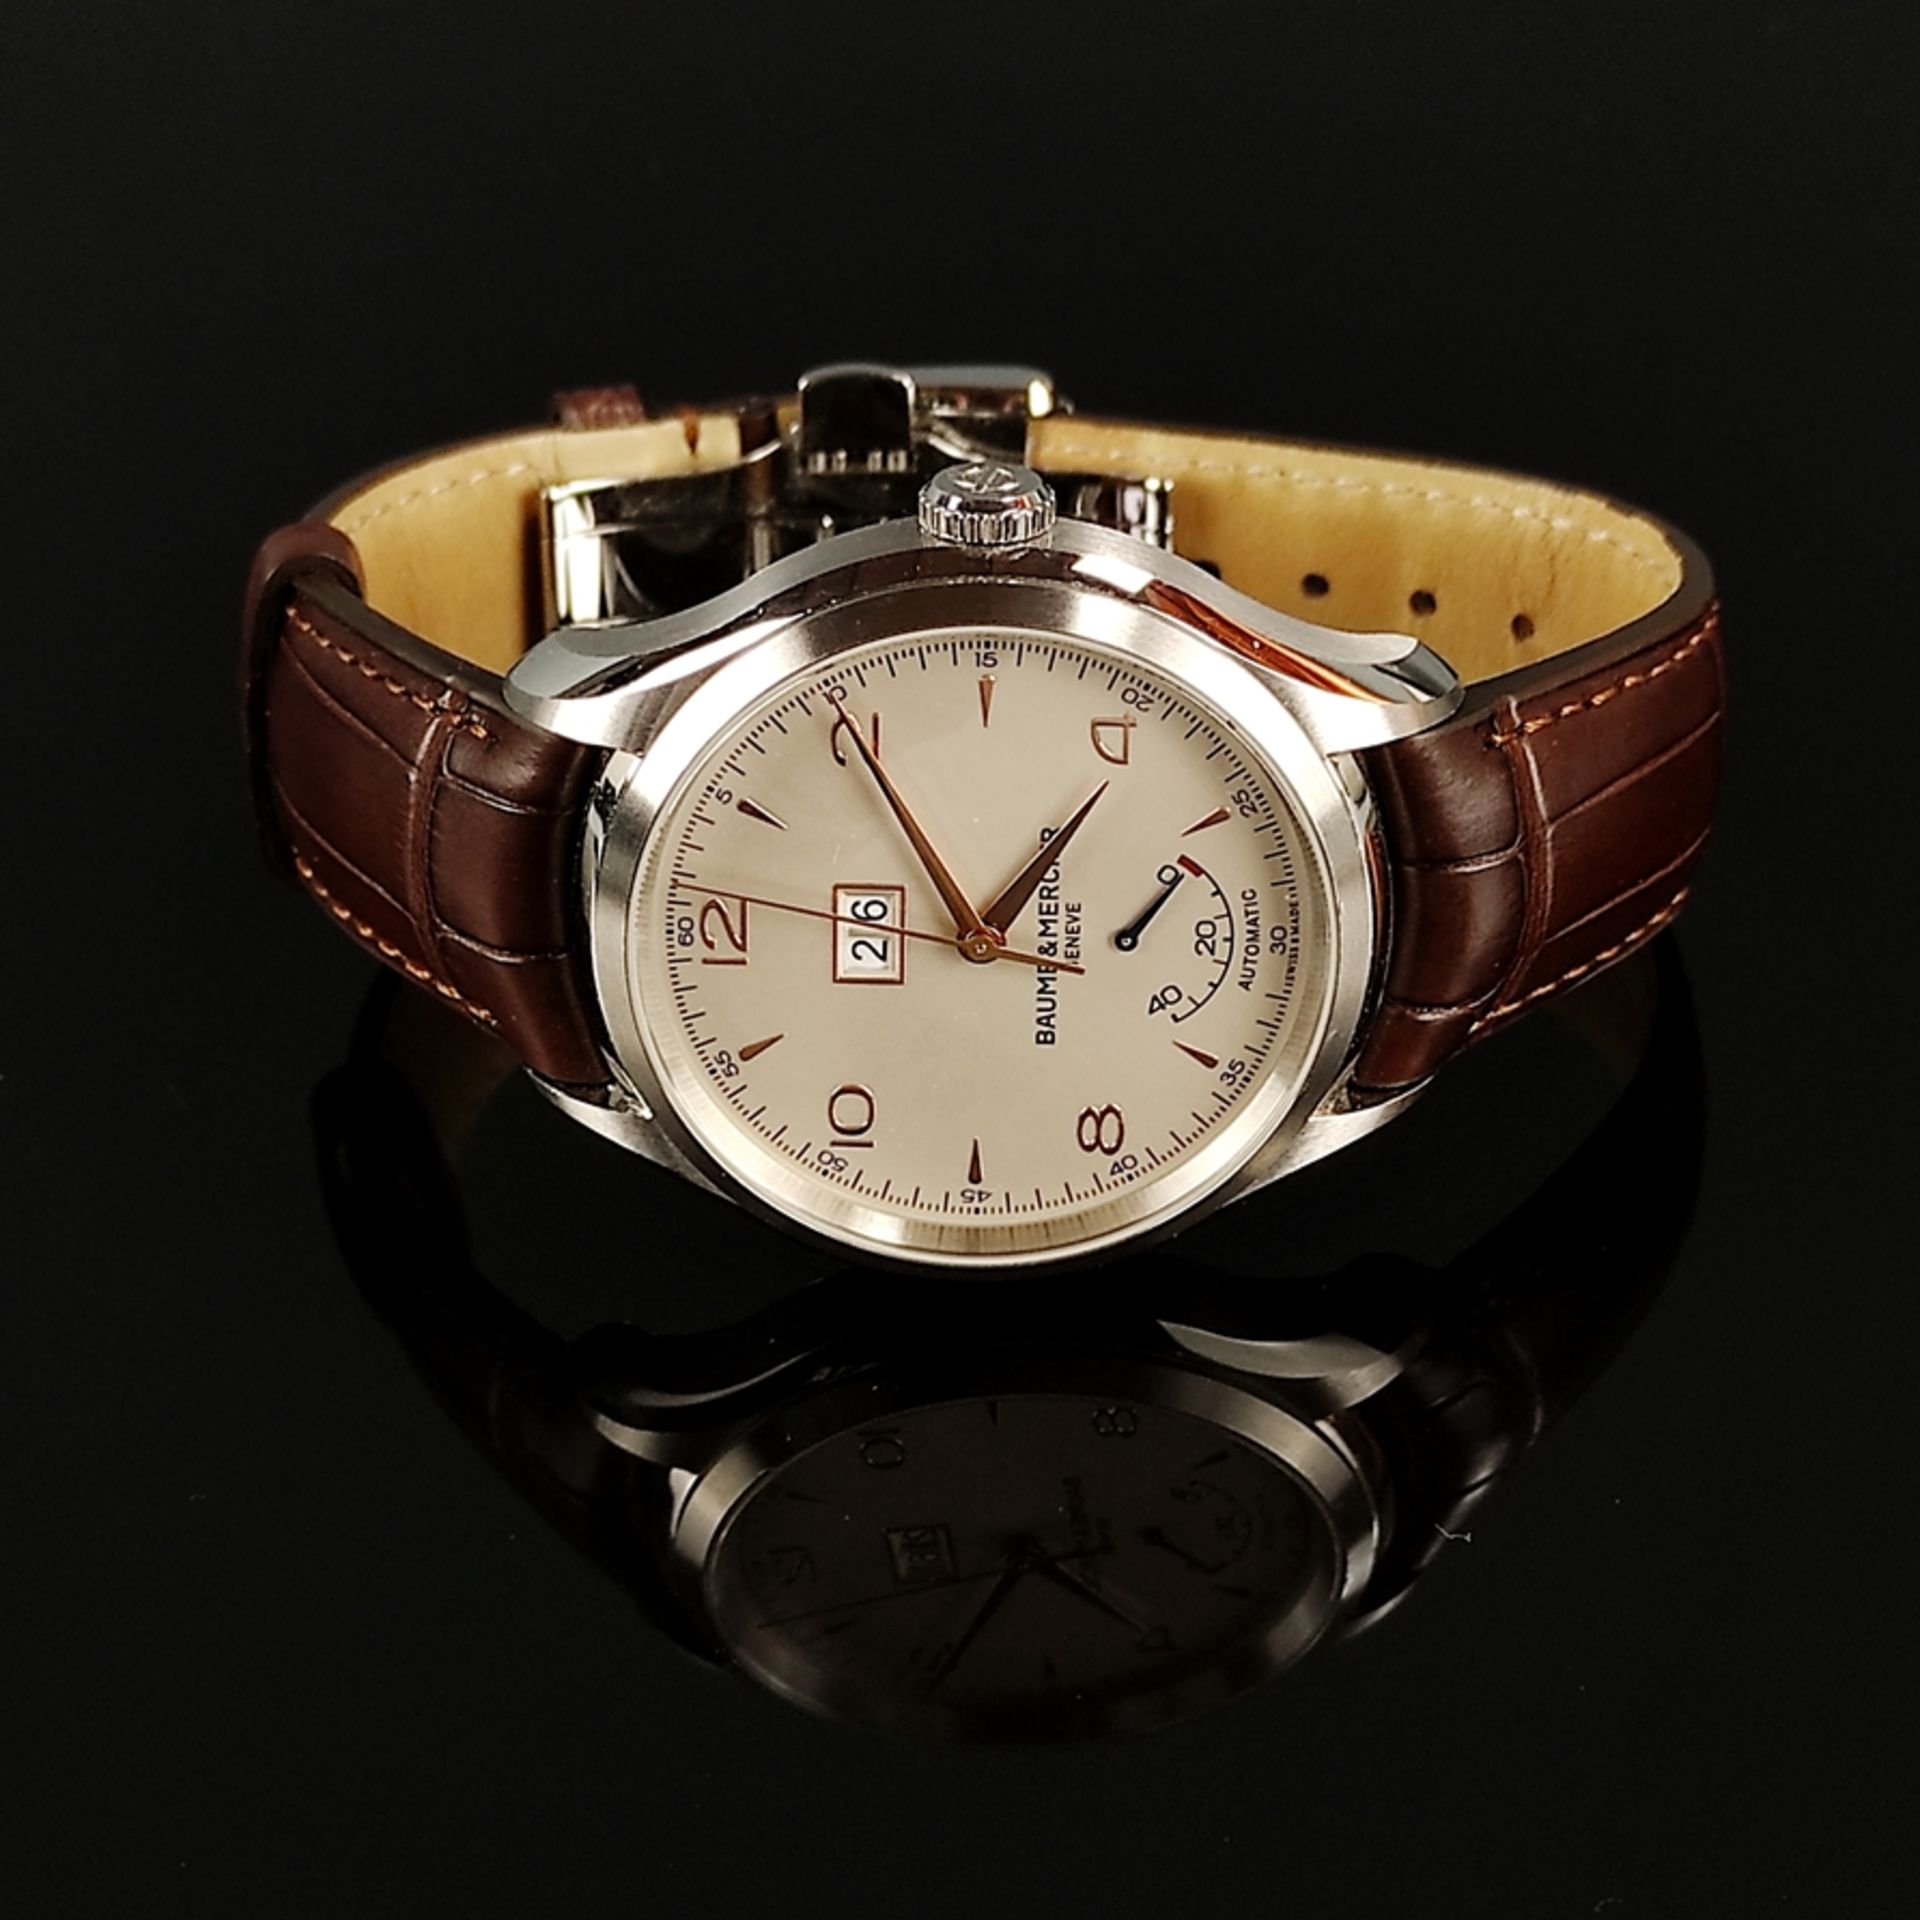 Wristwatch, Baume & Mercier, Clifton 10205, automatic with power reserve up to 42 hours, elegant th